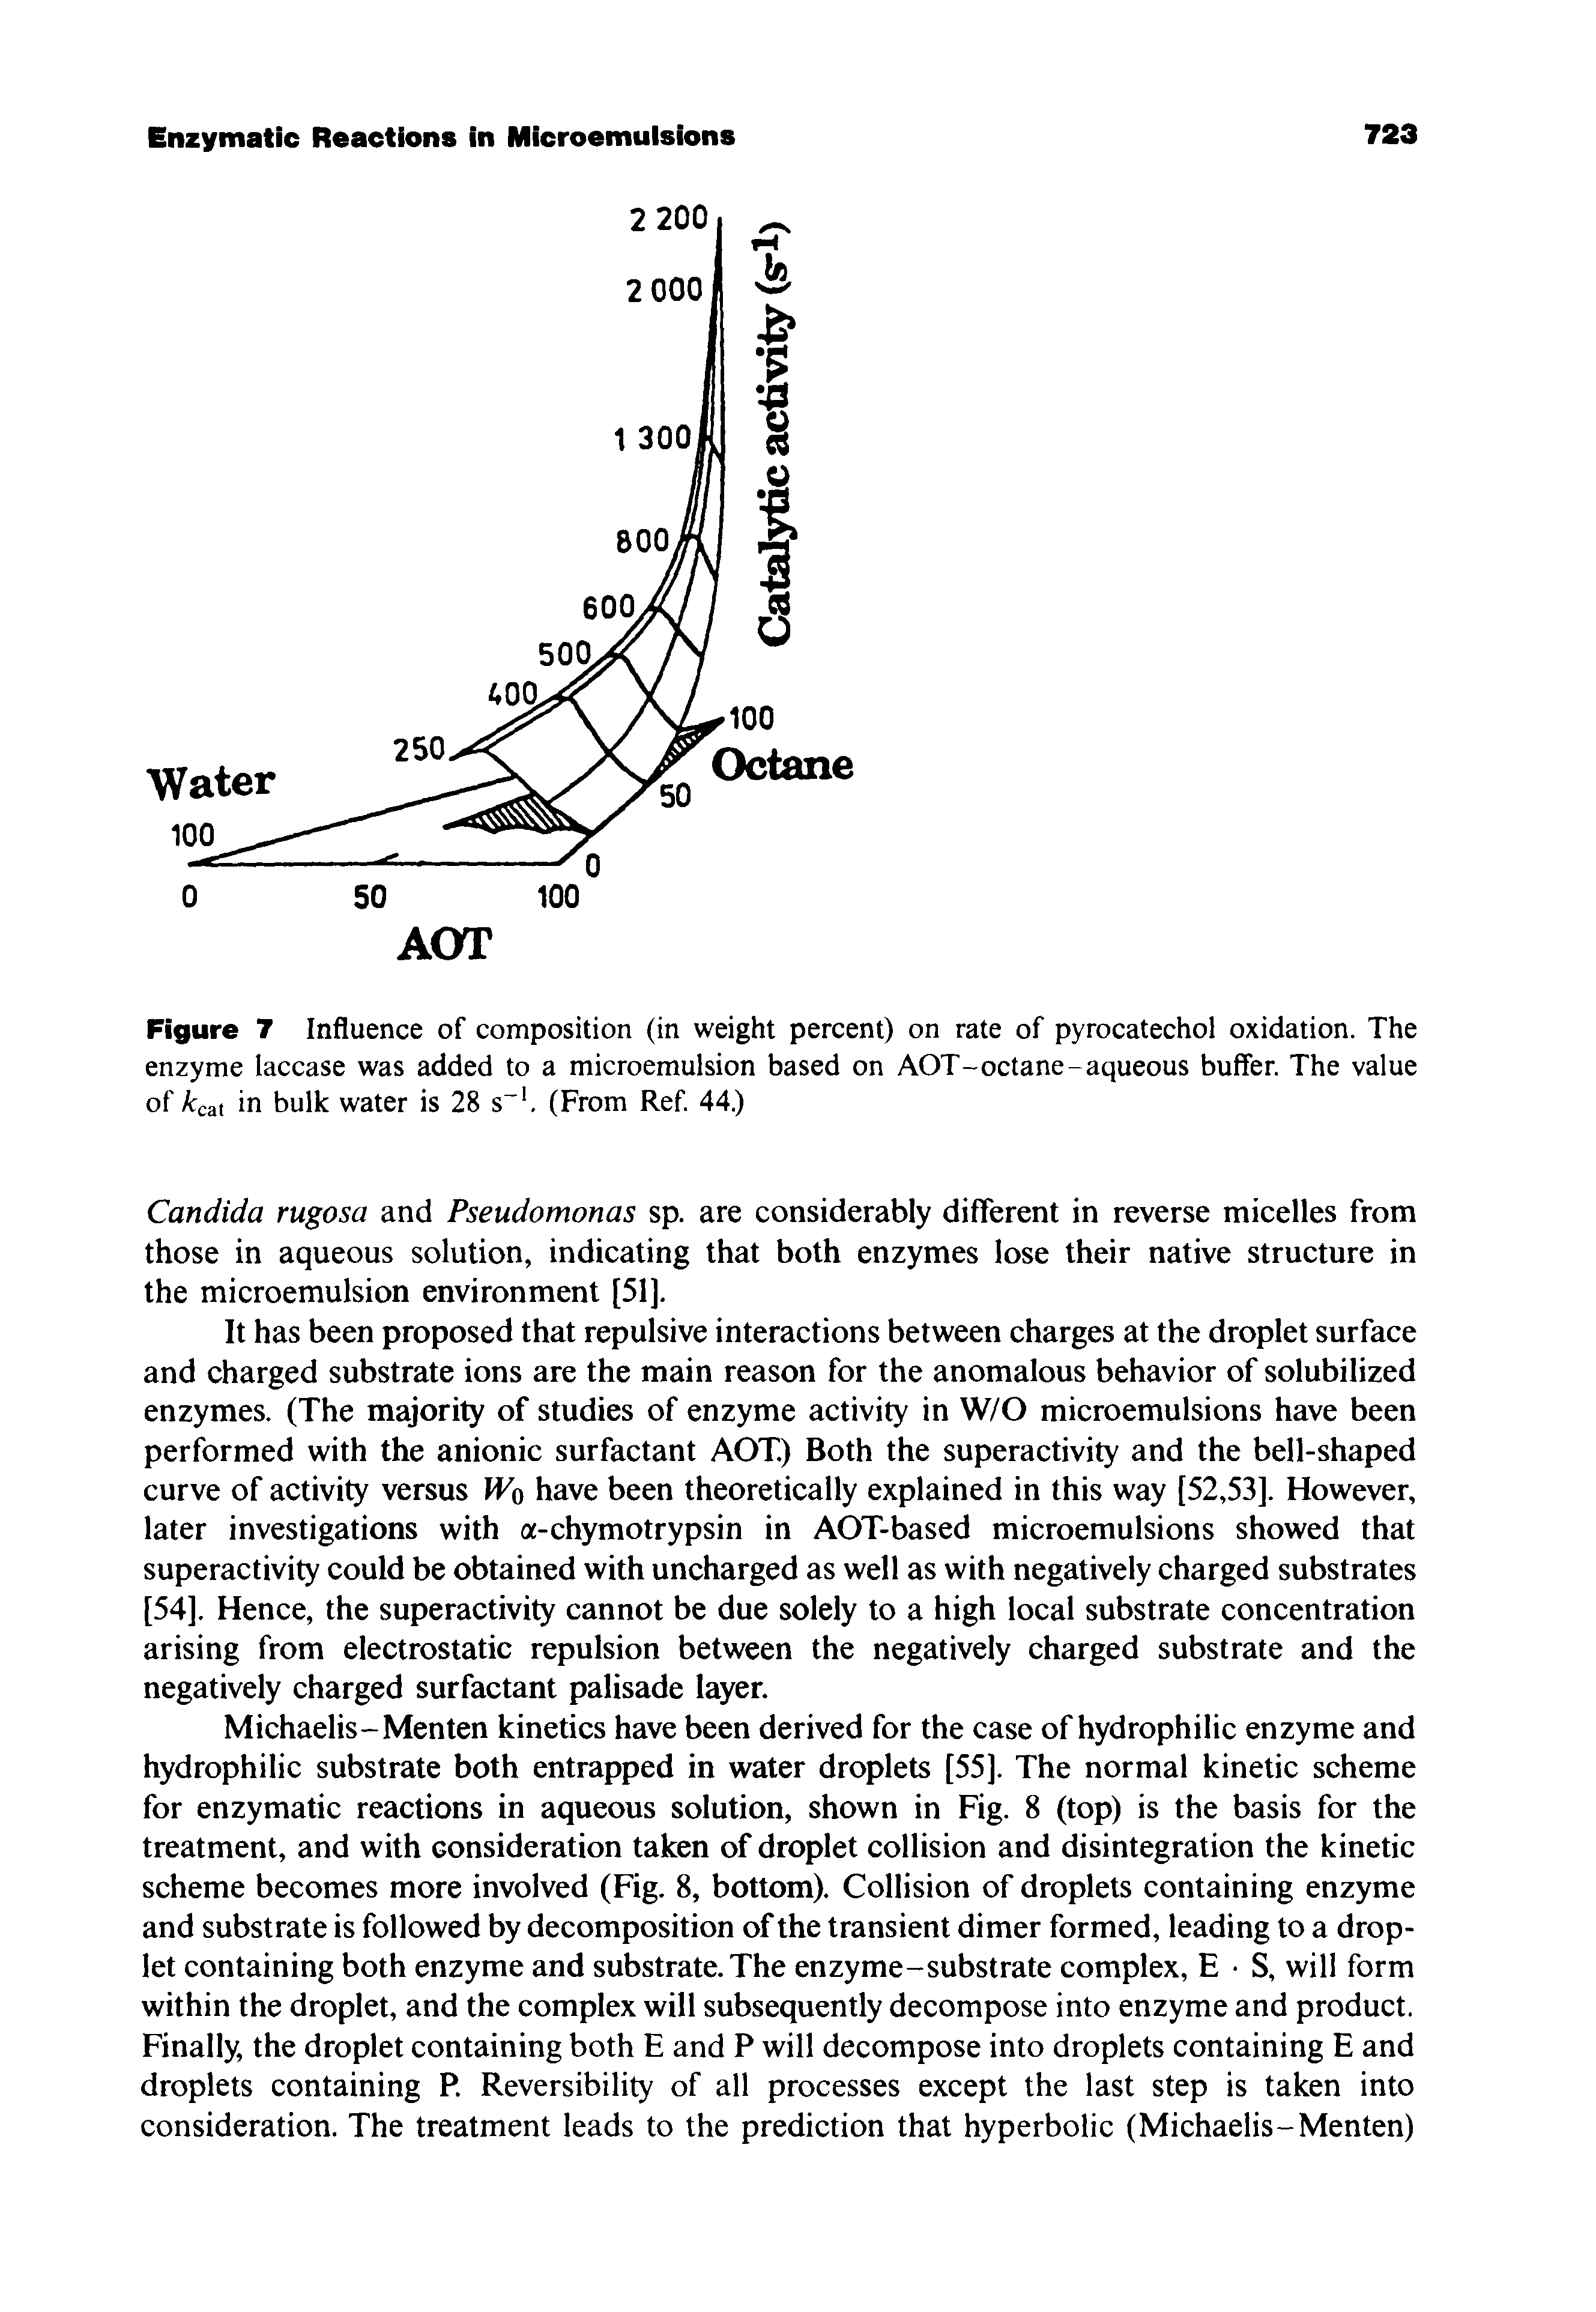 Figure 7 Influence of composition (in weight percent) on rate of pyrocatechol oxidation. The enzyme laccase was added to a microemulsion based on AOT-octane-aqueous buffer. The value of kca in bulk water is 28 s . (From Ref. 44.)...